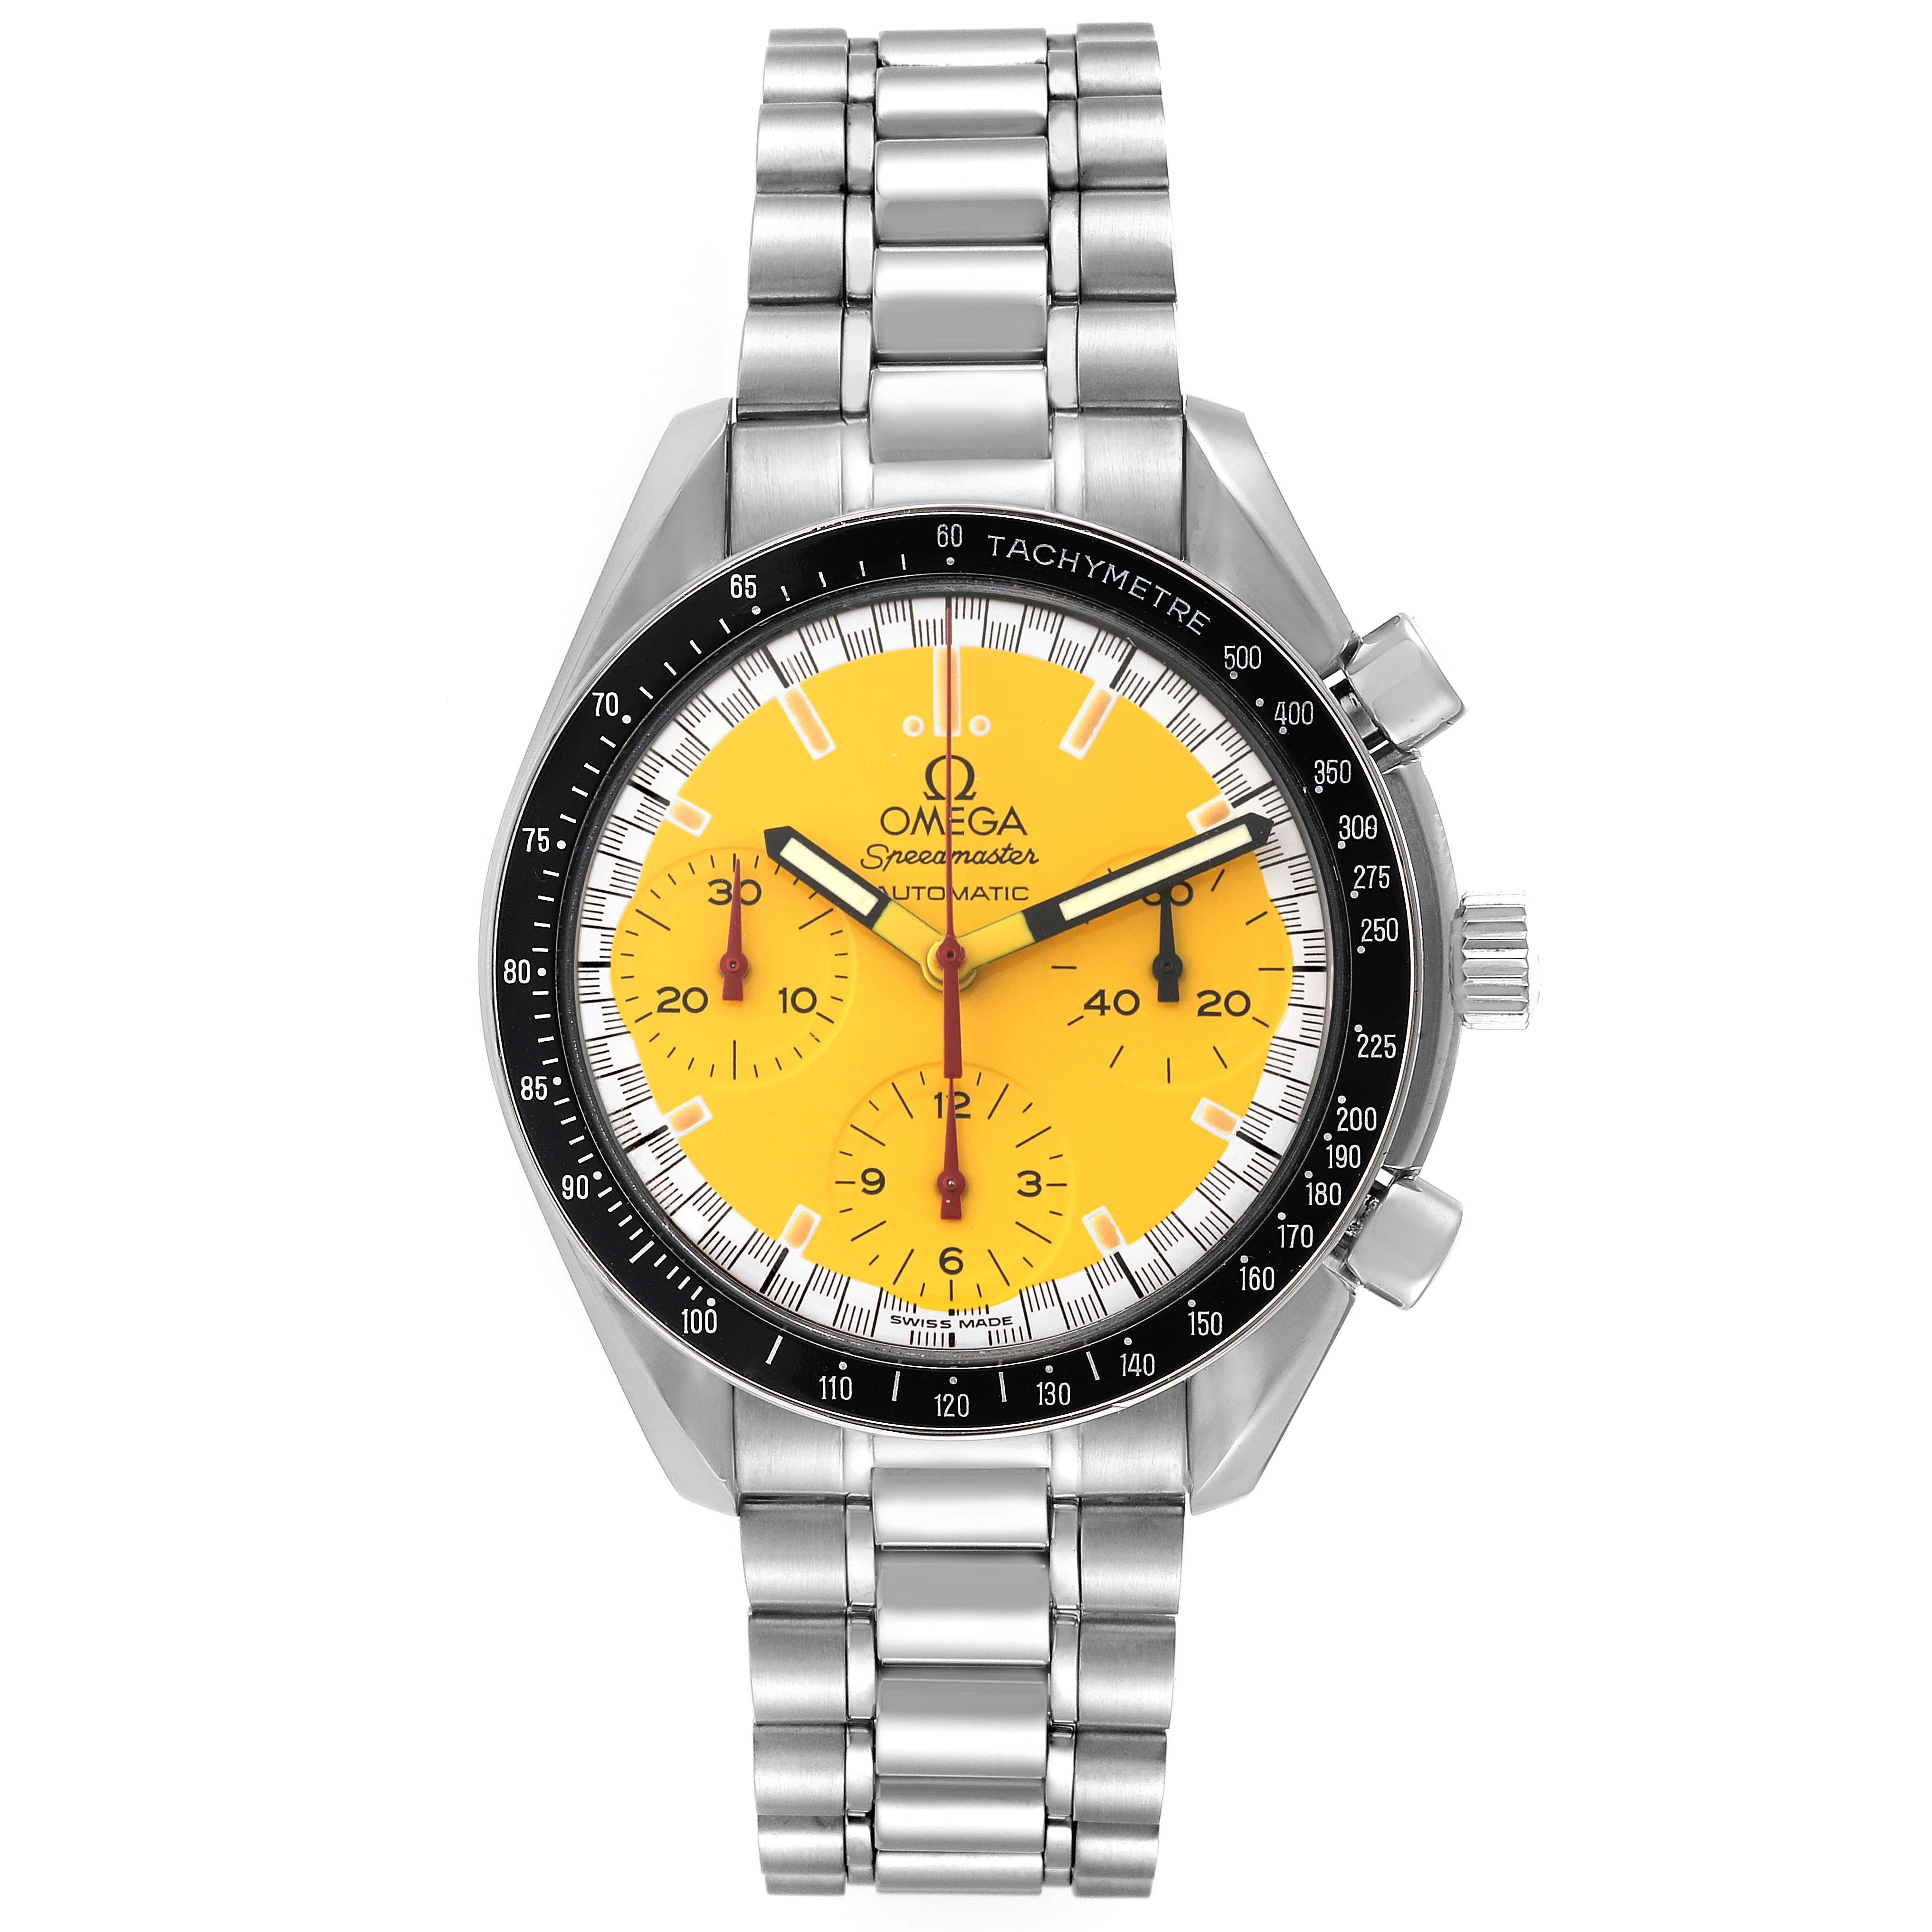 Omega Speedmaster Schumacher Yellow Dial Automatic Steel Mens Watch 3510.12.00. Automatic self-winding chronograph movement. Stainless steel round case 39.0 mm in diameter. Black tachymeter bezel. Scratch-resistant sapphire crystal. Yellow dial with